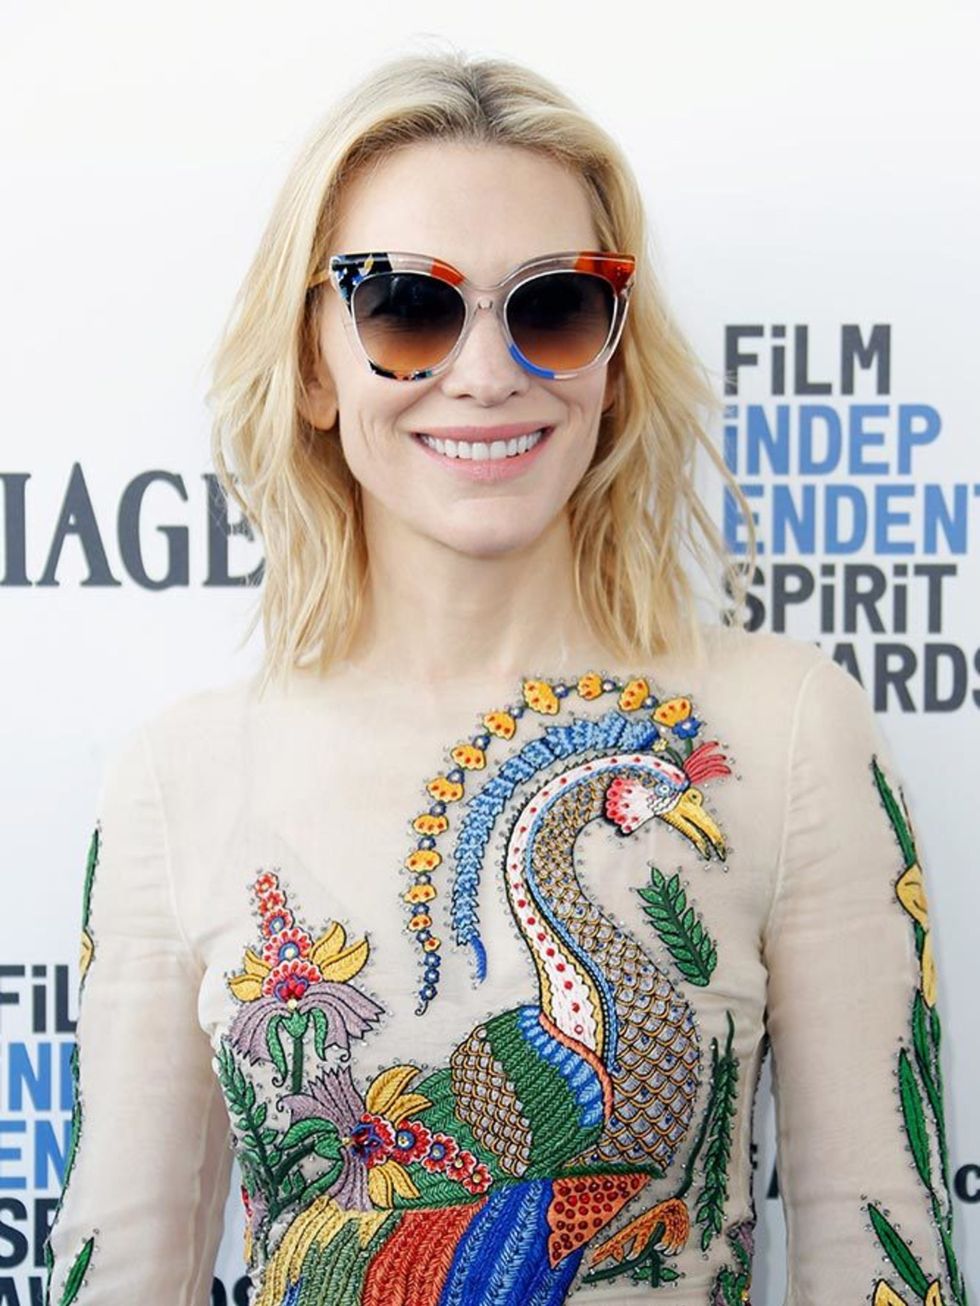 Cate Blanchett wearing a pair of Fendi Jungle sunglasses at the Independent Spirit Film Awards in California, March 2016.